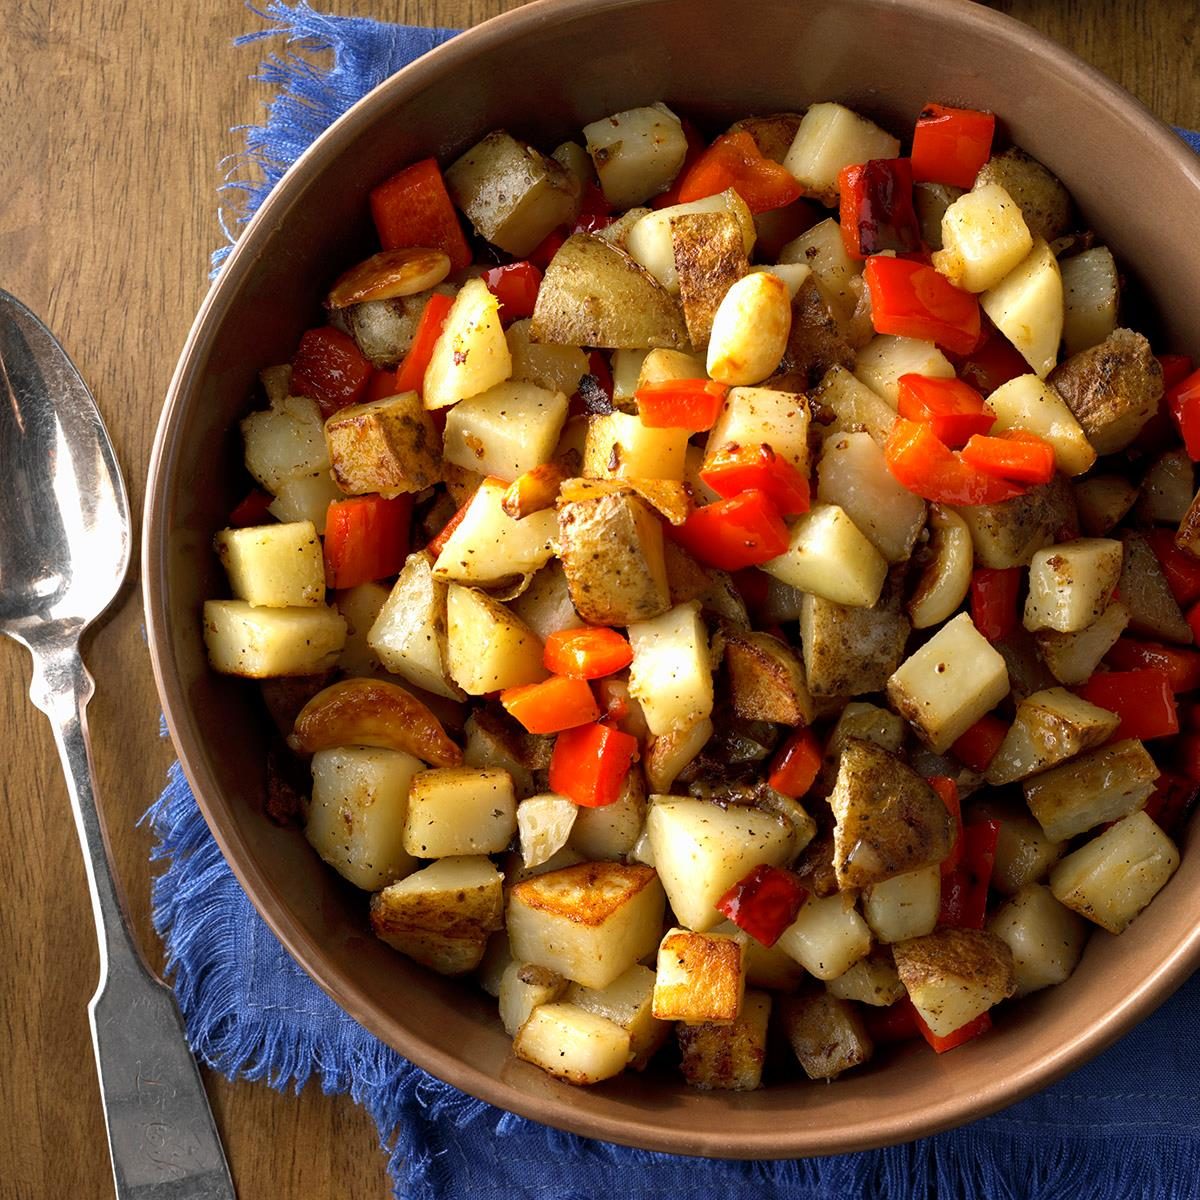 Skillet Potatoes with Red Pepper and Whole Garlic Cloves